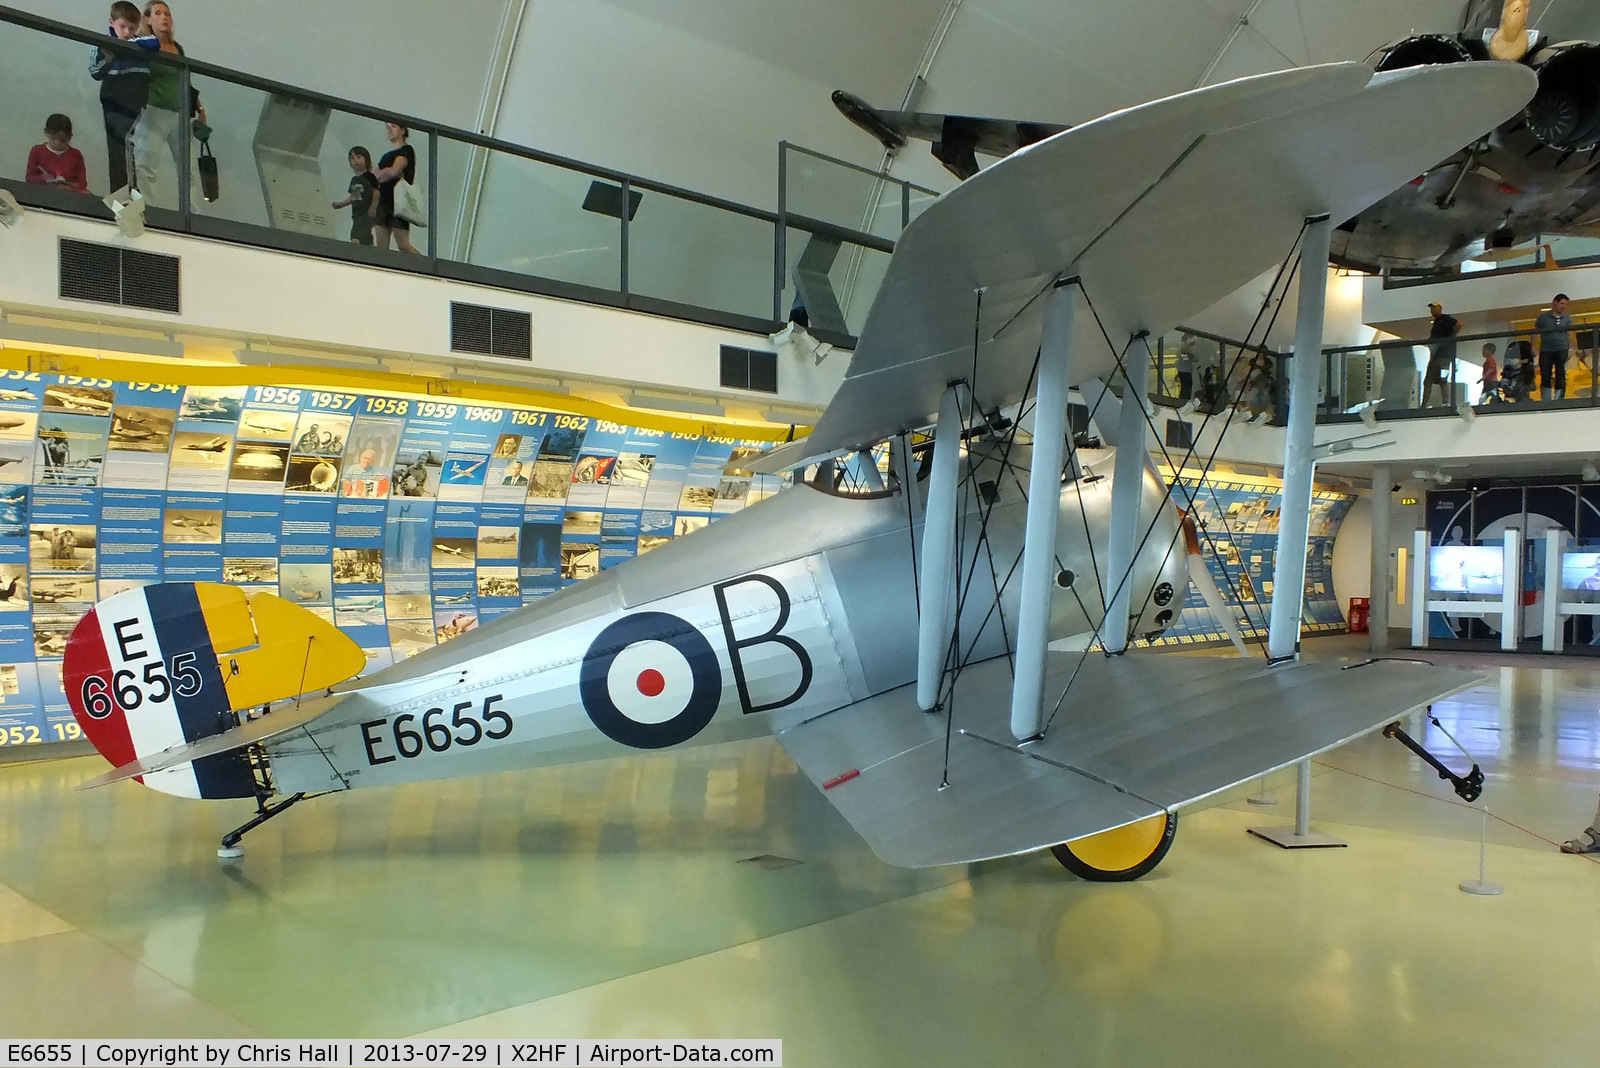 E6655, Sopwith Snipe 7F.1 Replica C/N Not found E6655, Displayed at the RAF Museum, Hendon